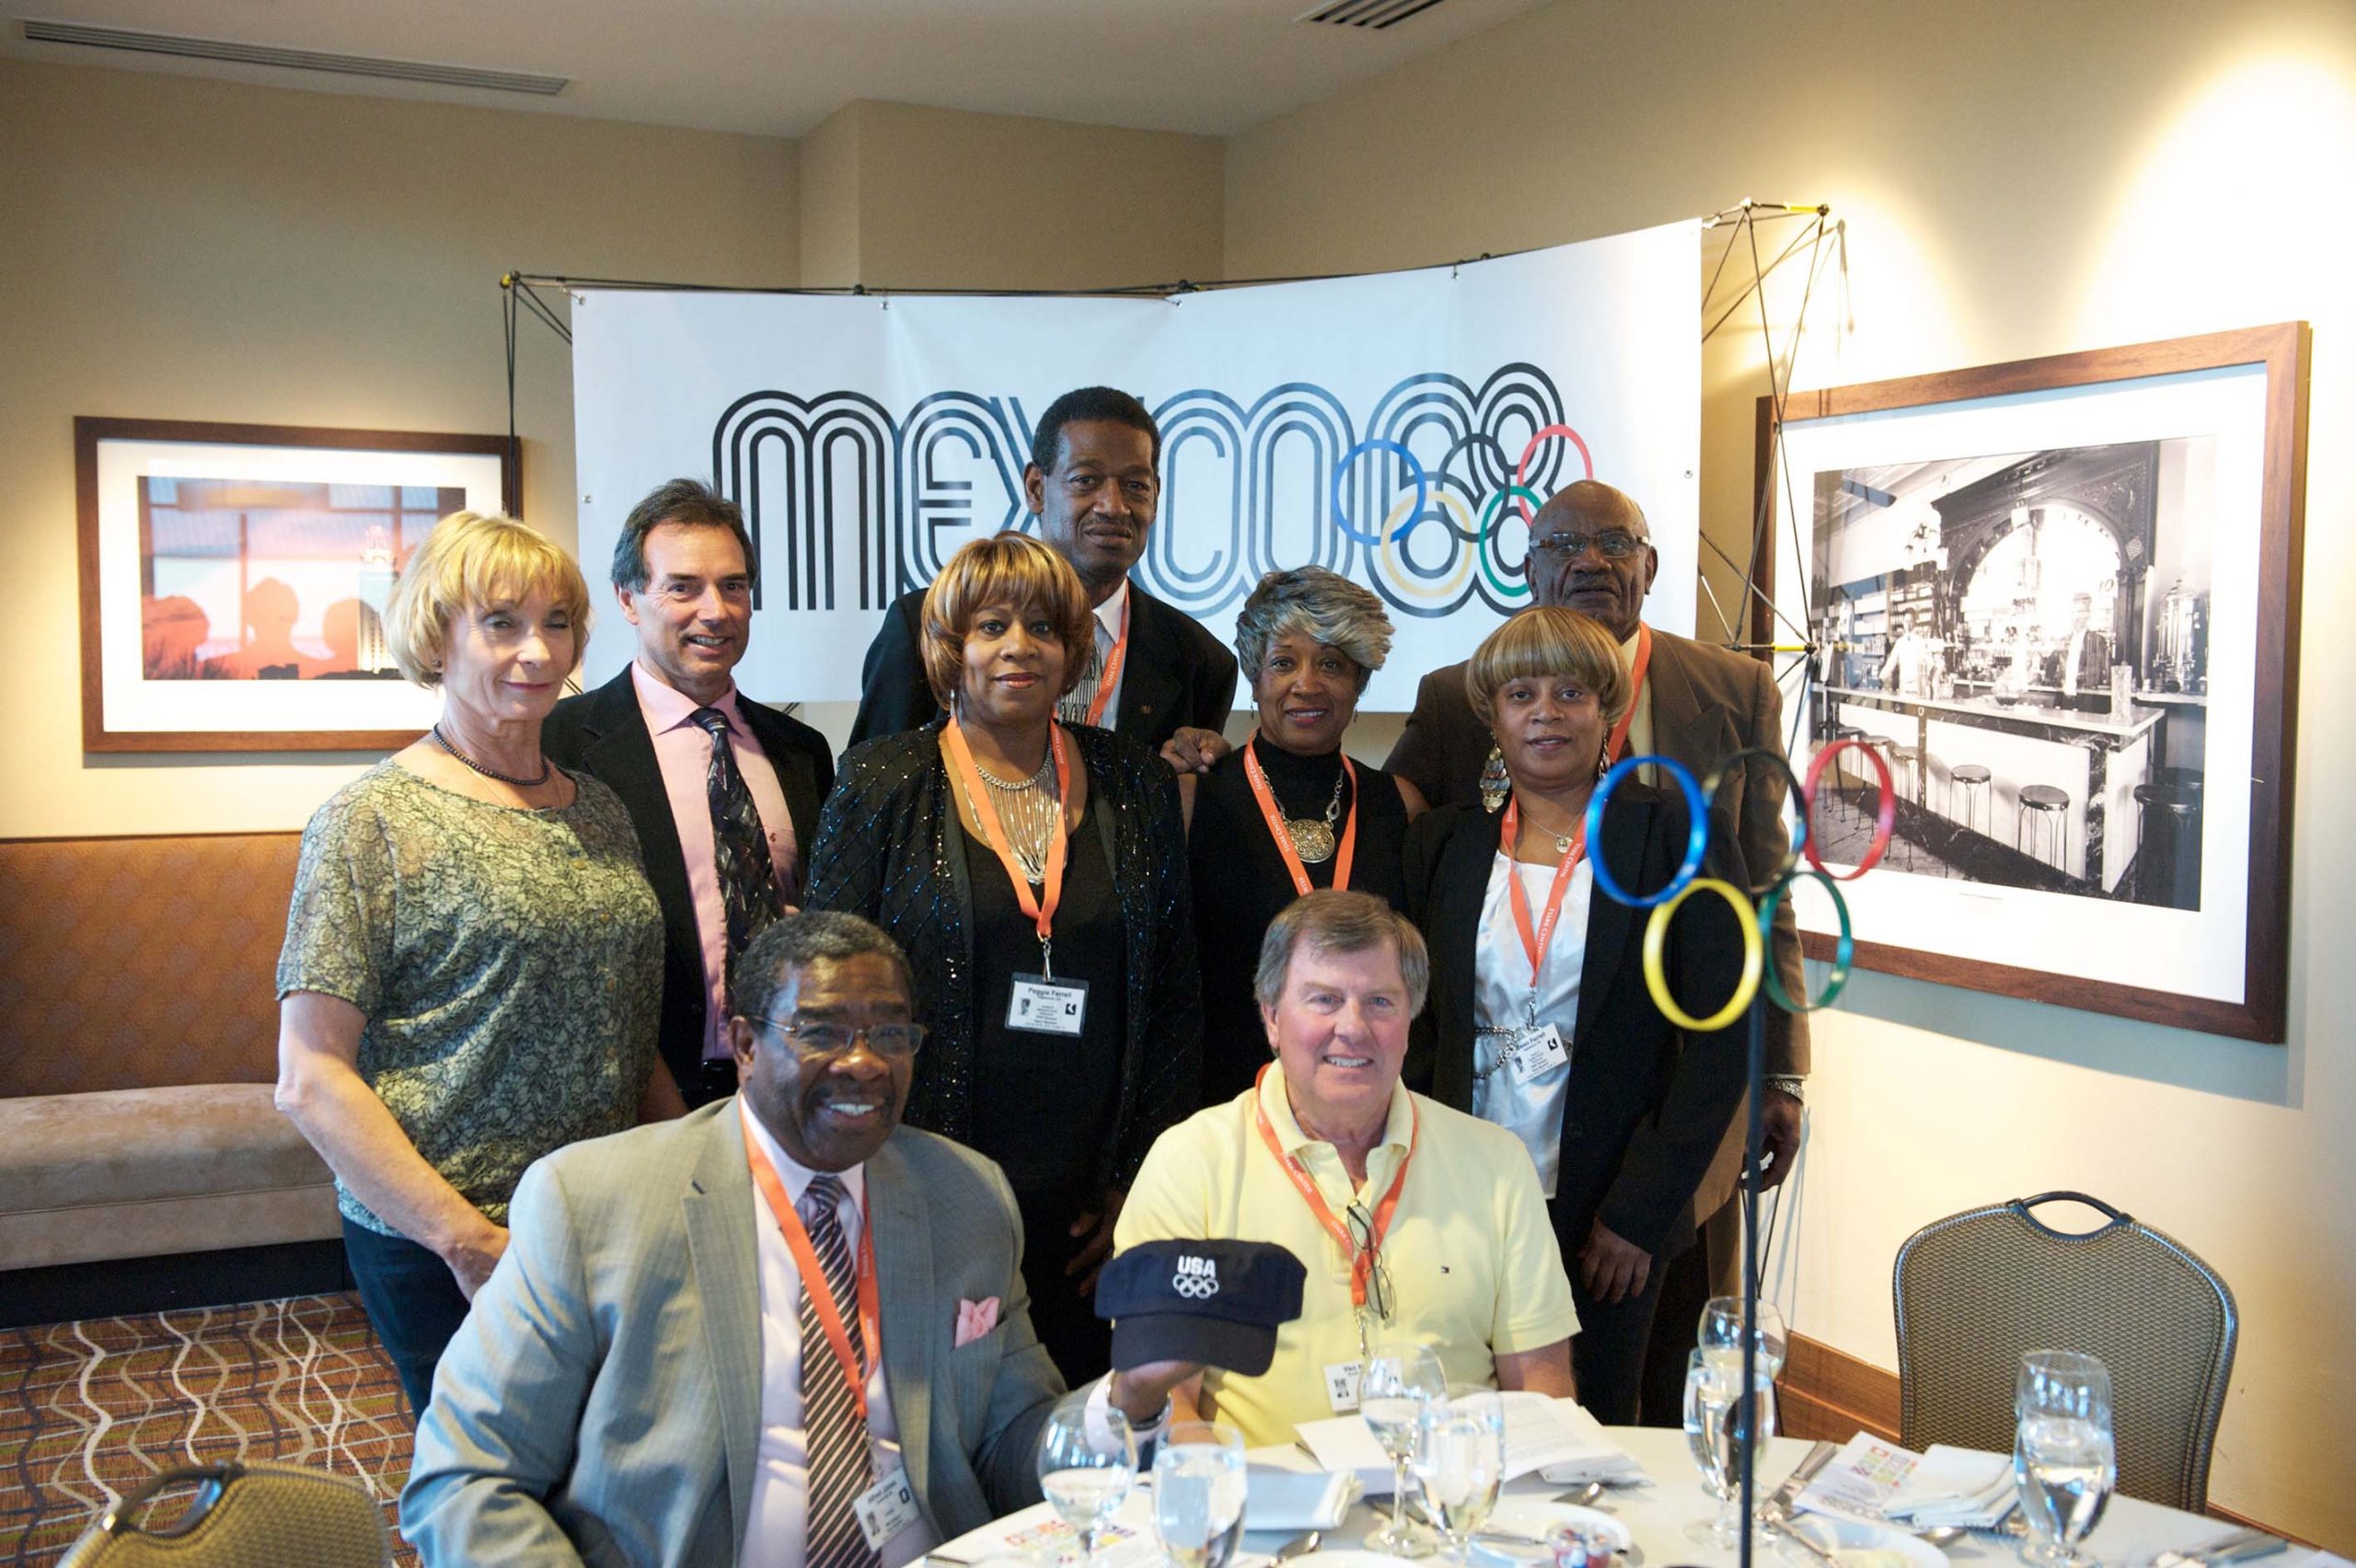 Nine people at a table at the 1968 U.S. Olympic Team 2012 Reunion.